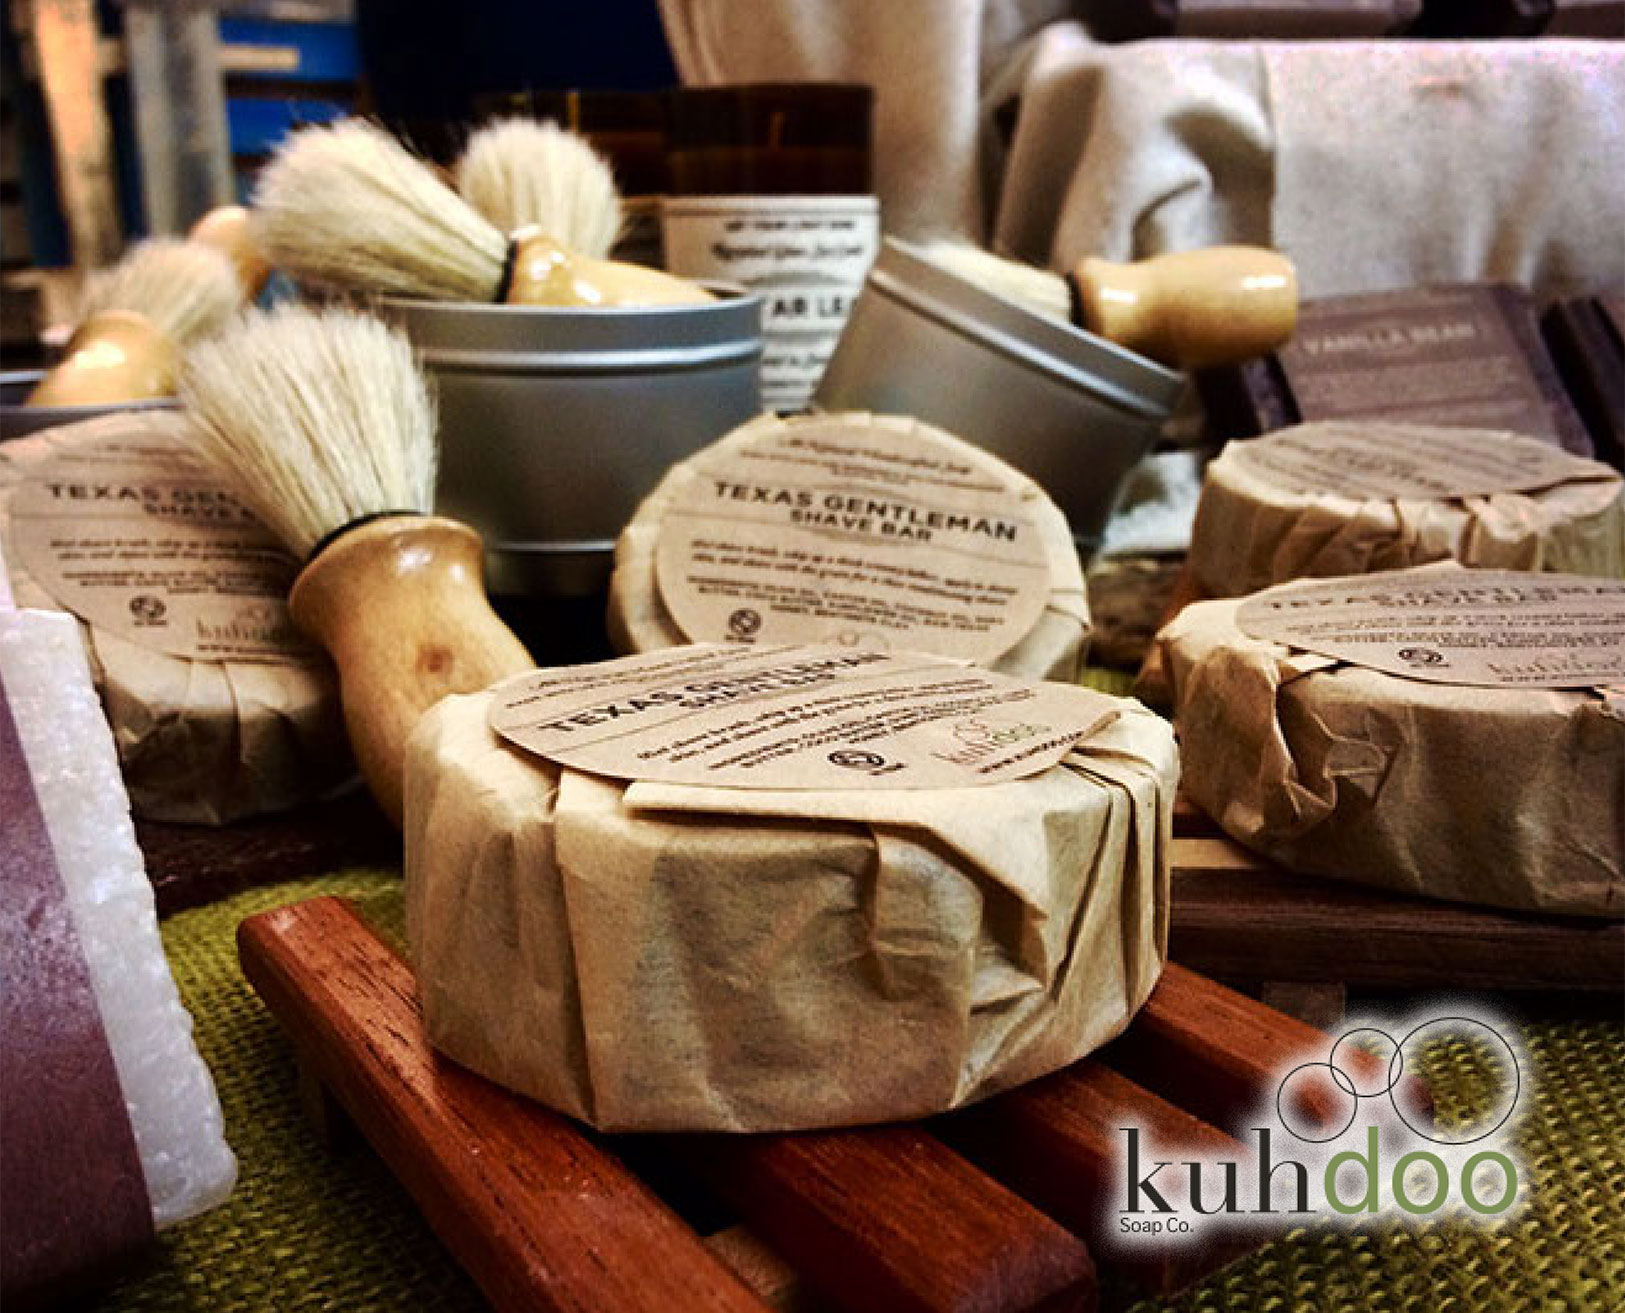 Kuhdoo Soap Co.

“MAKING SOAP IS A FUN FAMILY AFFAIR”
Hi! We’re the Mangums. Jared, Kaysha, and Isaac. Making soap is a fun family affair for us, just on a whole different scale these days.